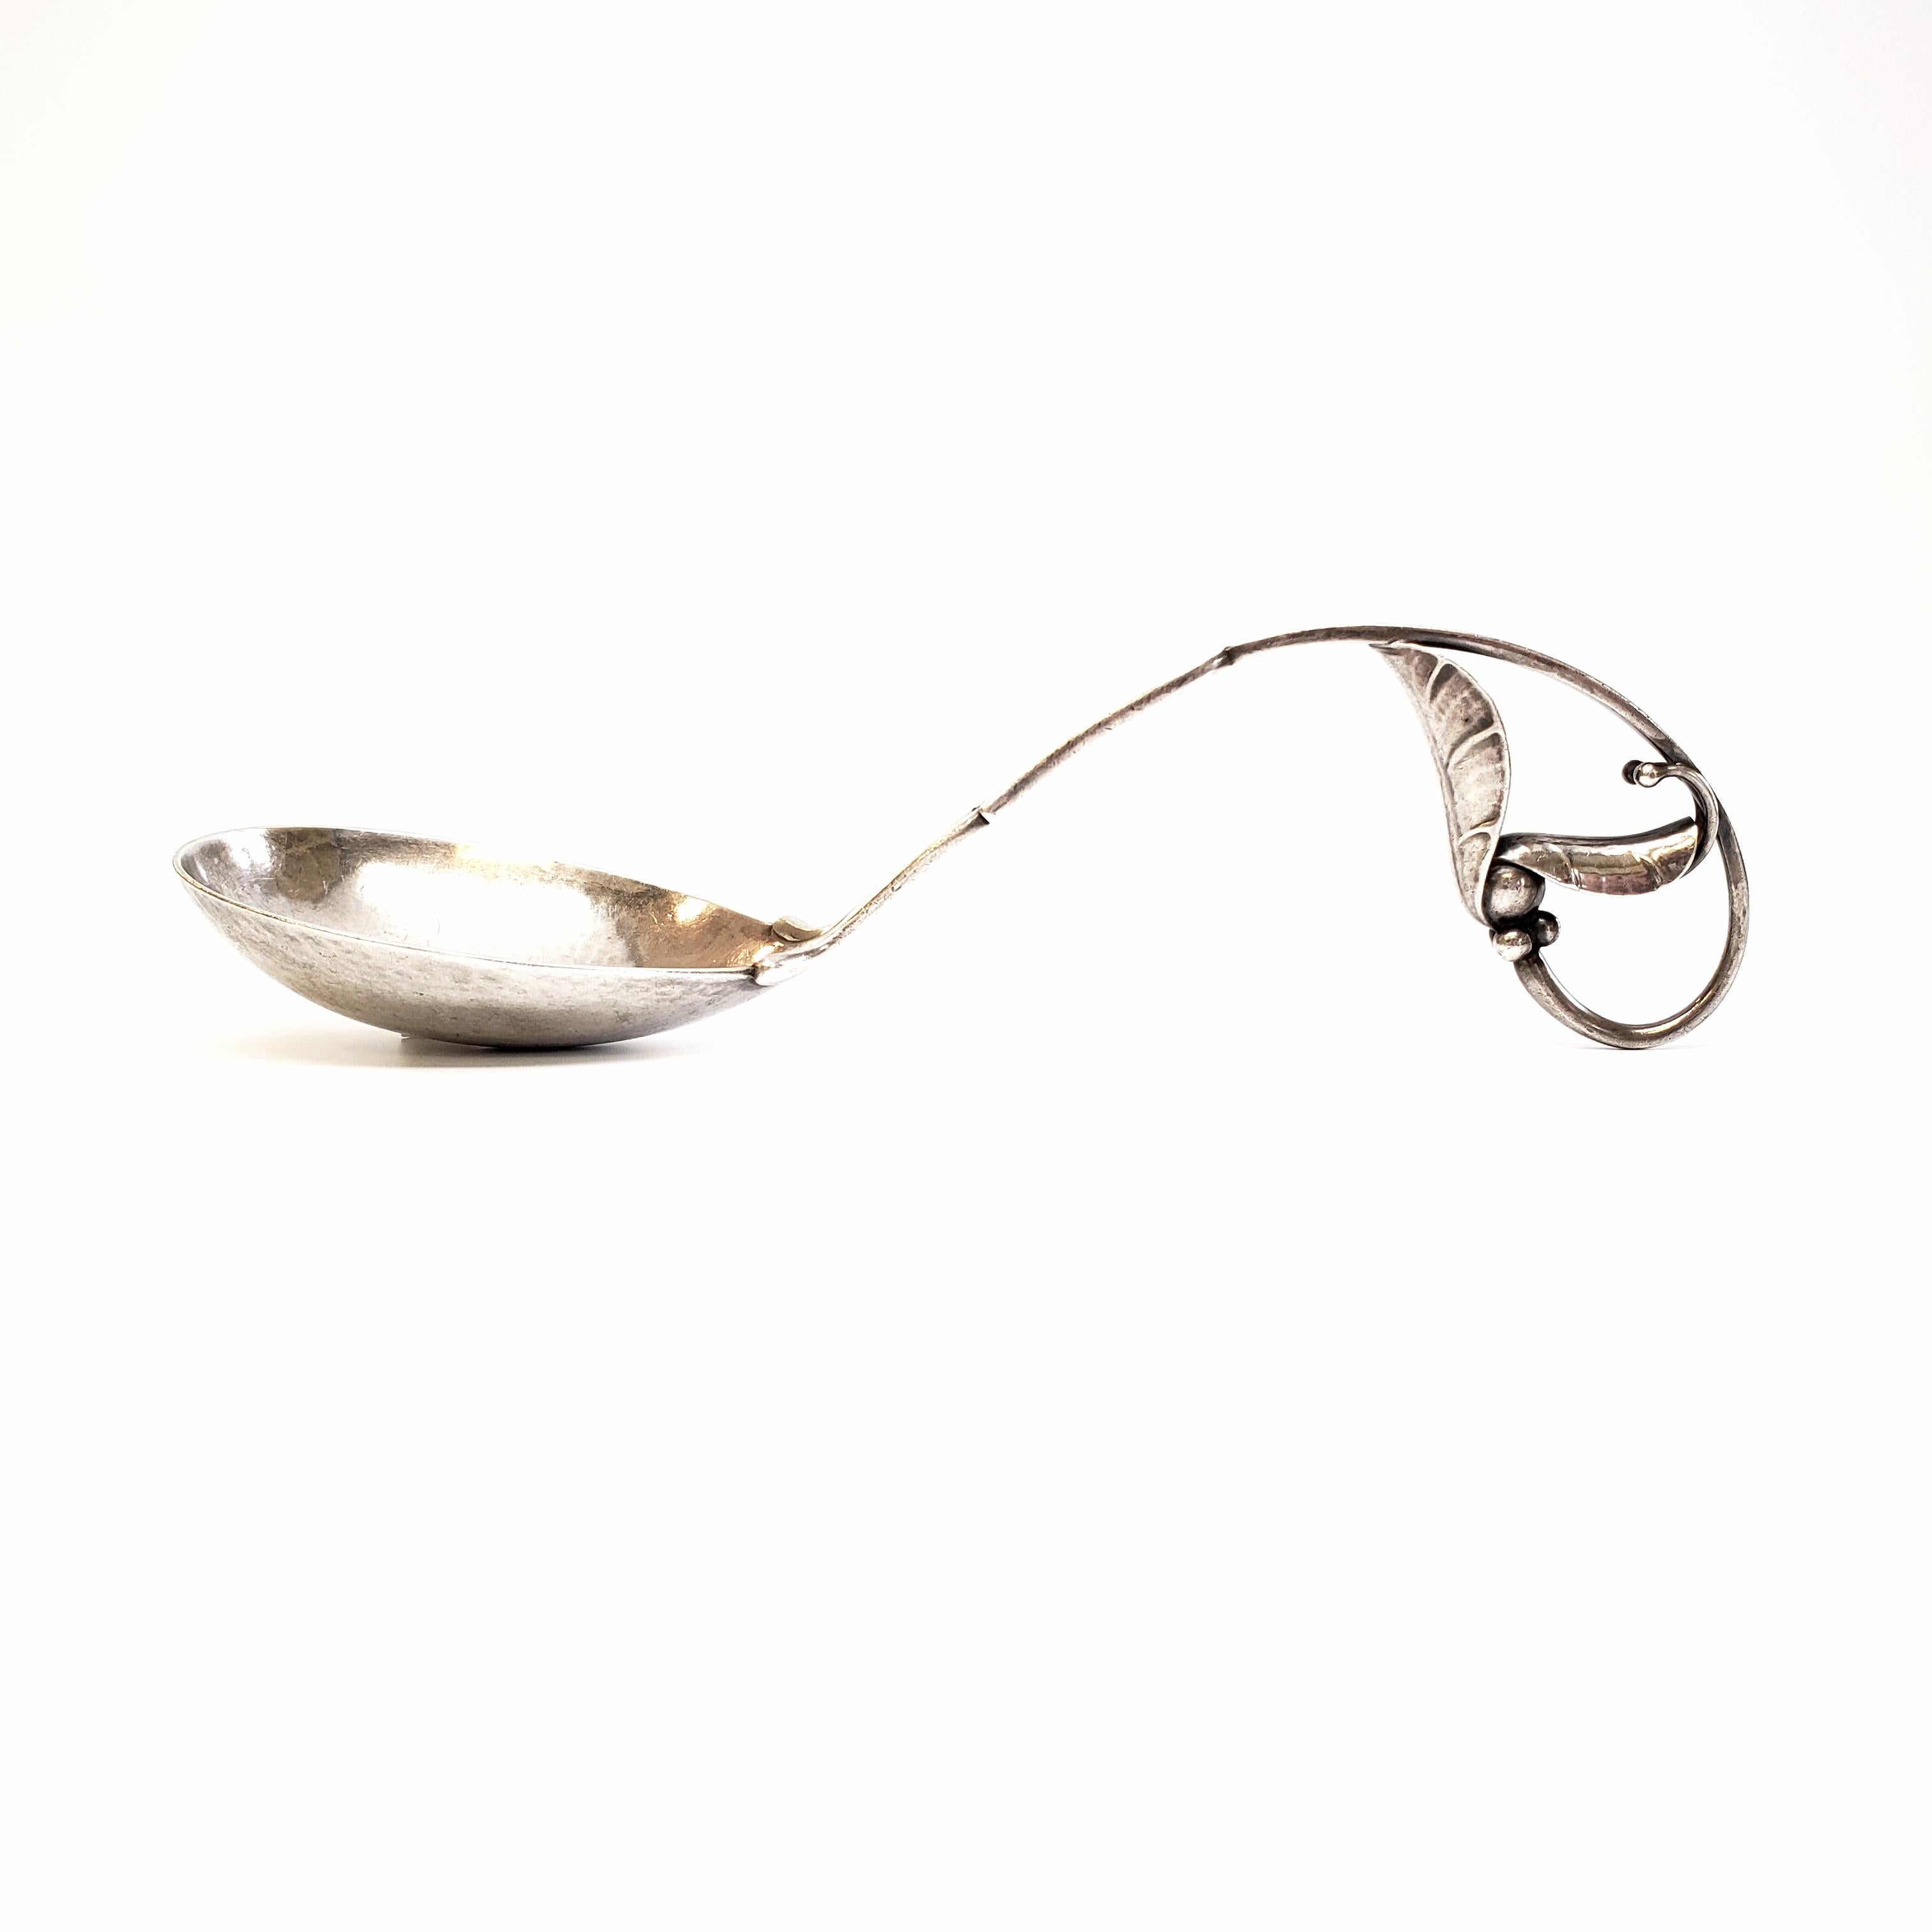 Vintage Georg Jensen Denmark sterling silver ladle in the Blossom pattern, #141.

Dated 1910-1925, this beautiful ladle features a hammered oval bowl, with a beautifully ornate curved handle with leaf designs.

Monogram appears to be